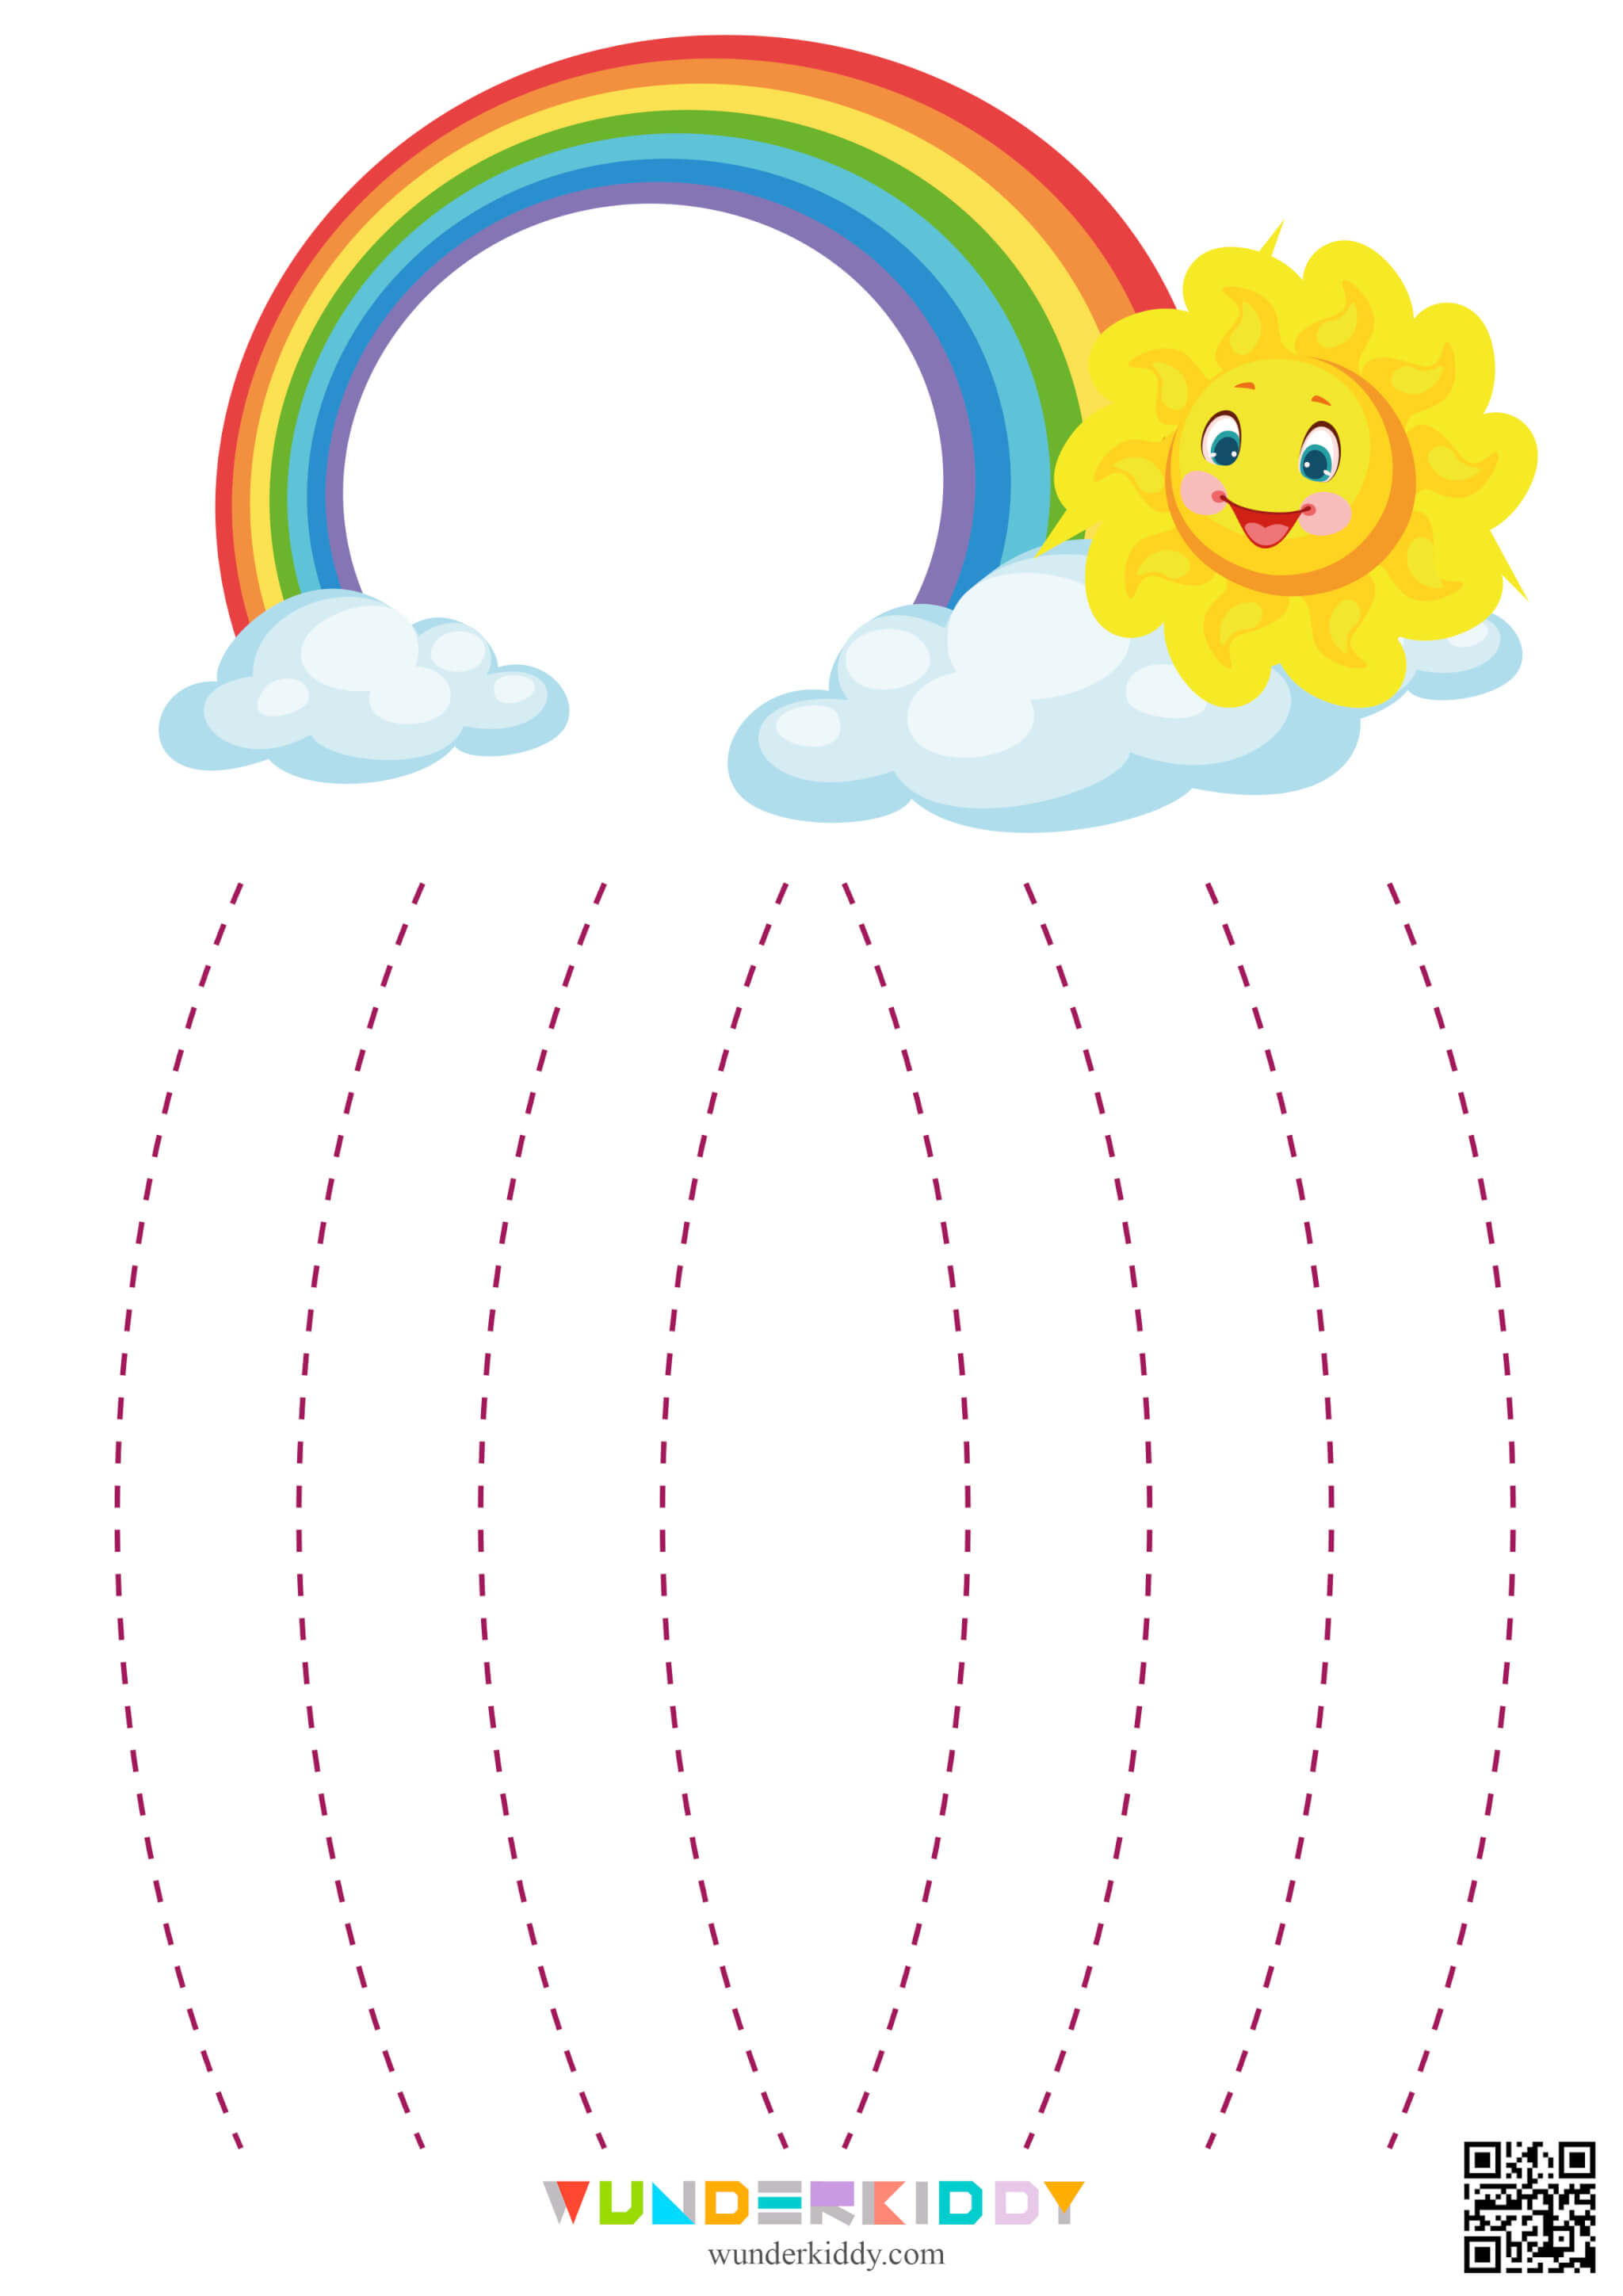 Worksheet for Pre-writing Practice Sun and Rainbow - Image 8